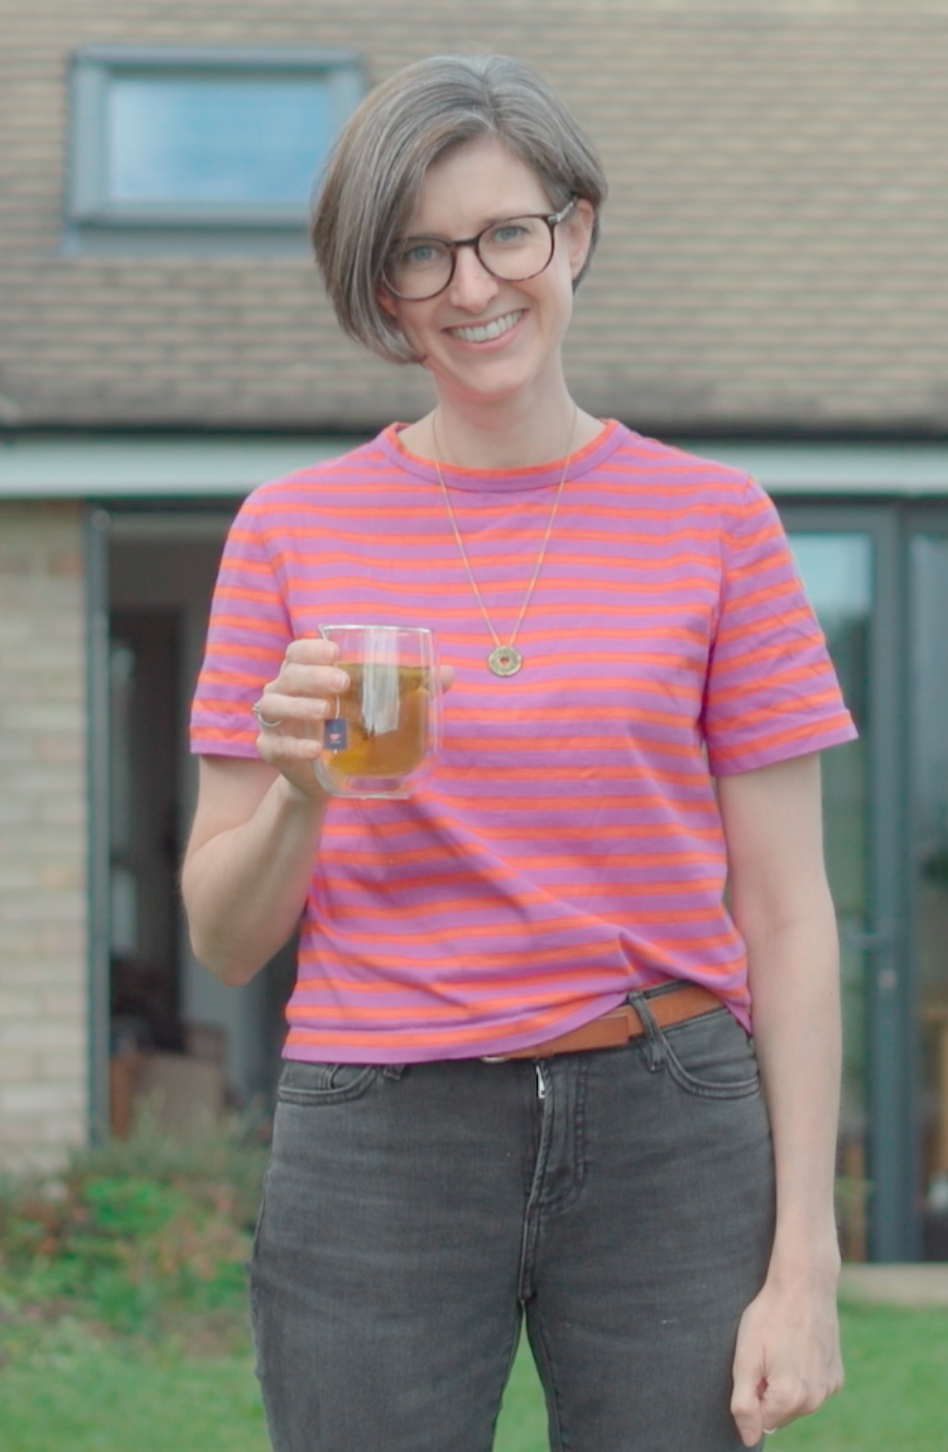 Bethan, founder of HotTea Mama, with a cup of tea stood outside her house, wondering if she's menopausal